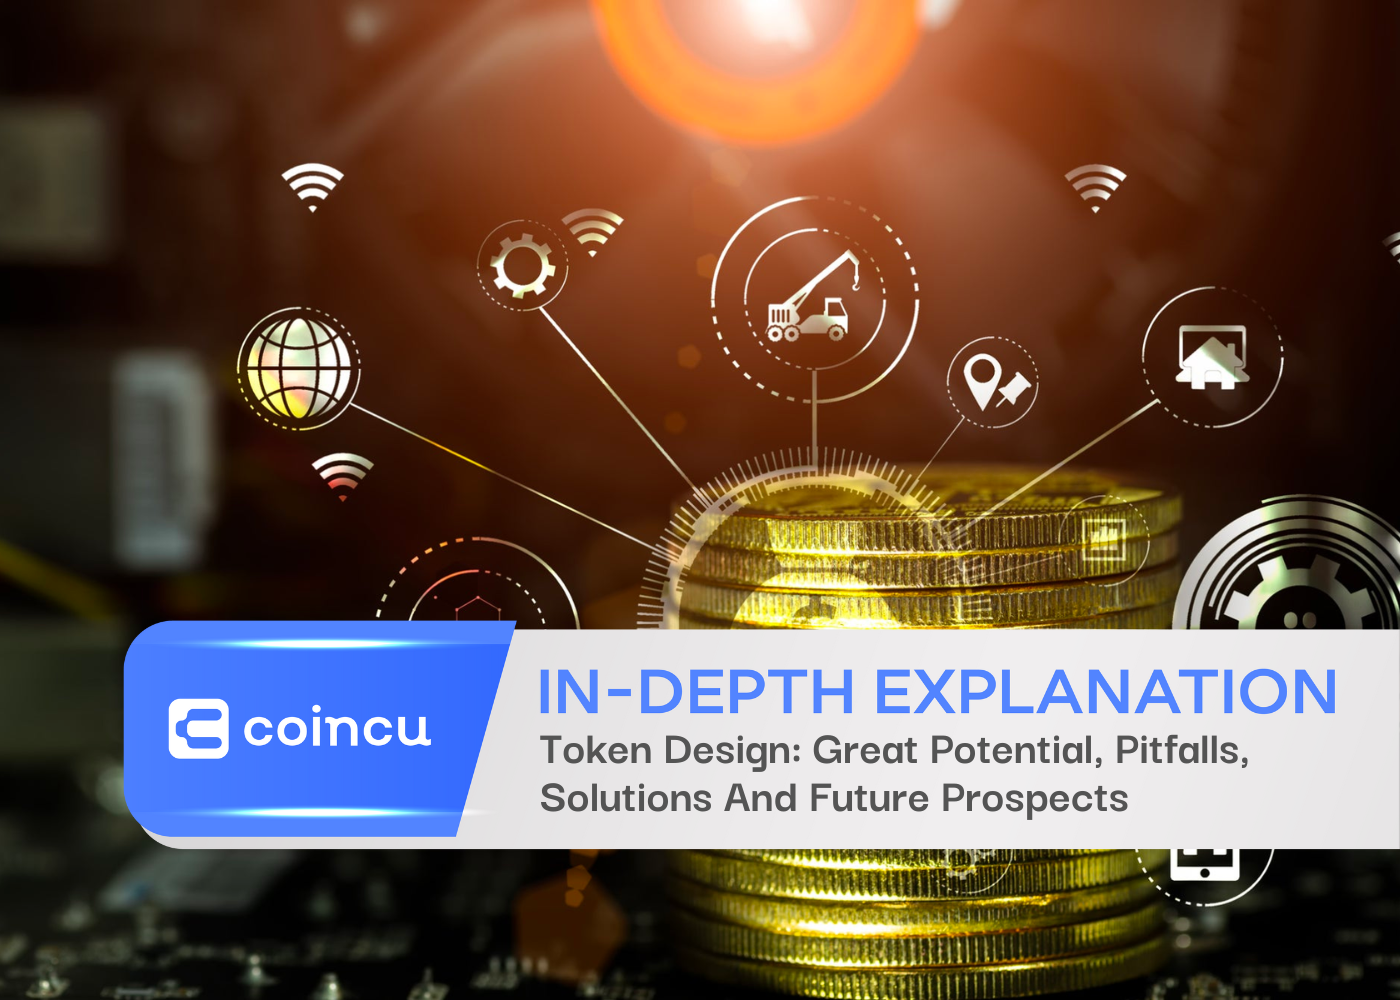 Token Design: Great Potential, Pitfalls, Solutions And Future Prospects